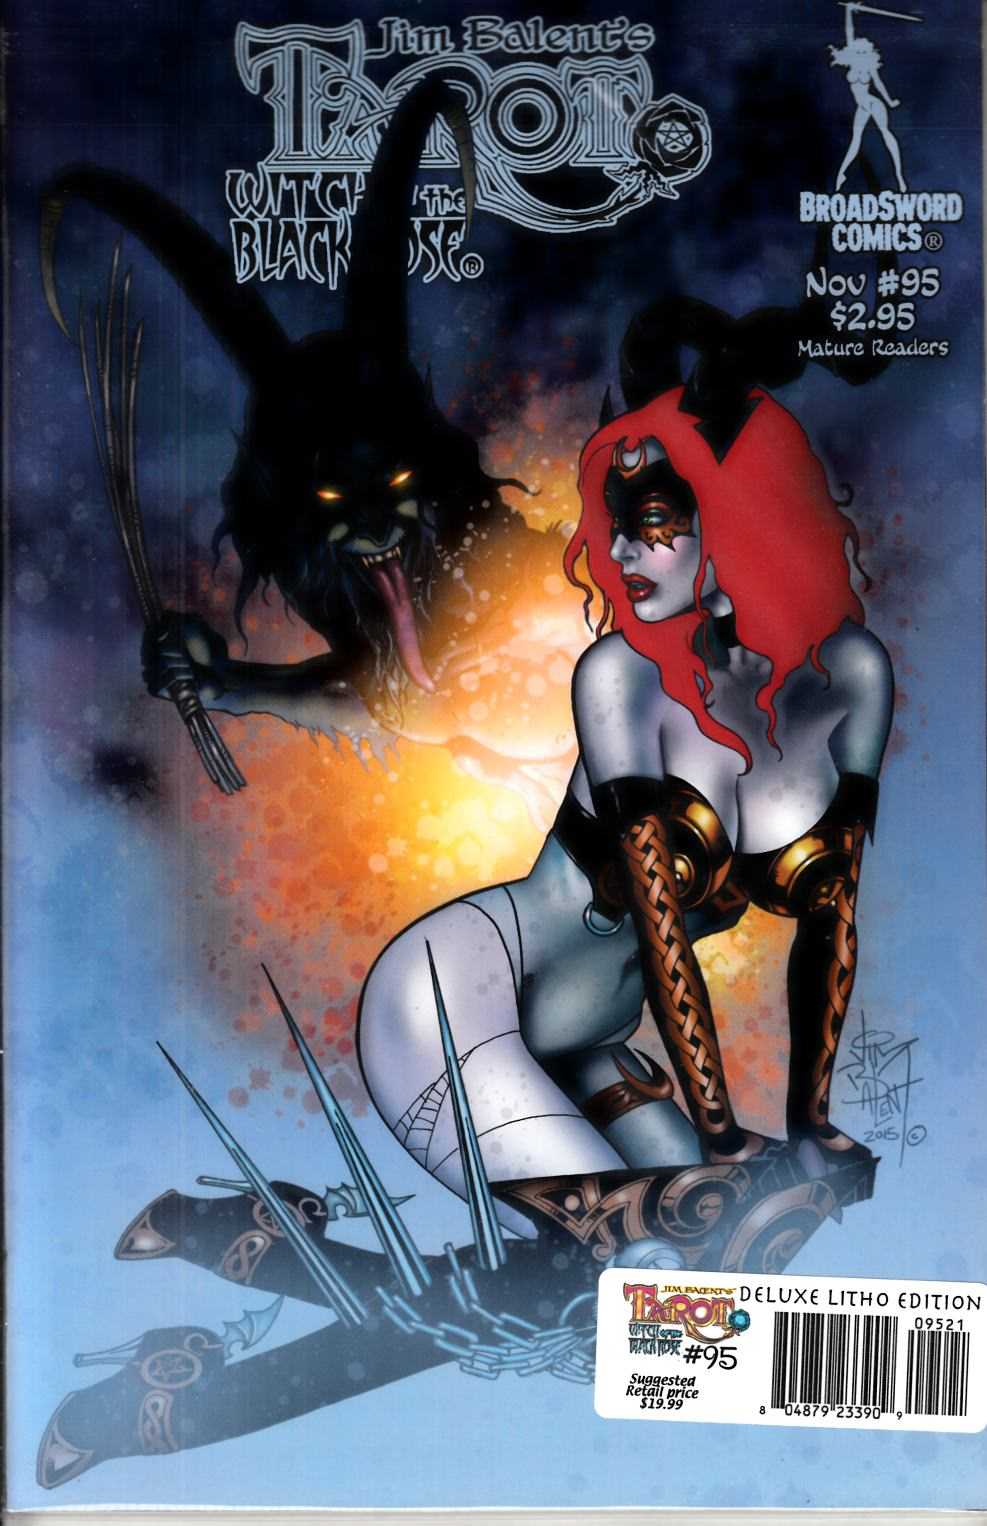 43 Hot Pictures Of Witch of the Black Rose Which Will Shake Your Reality | Best Of Comic Books